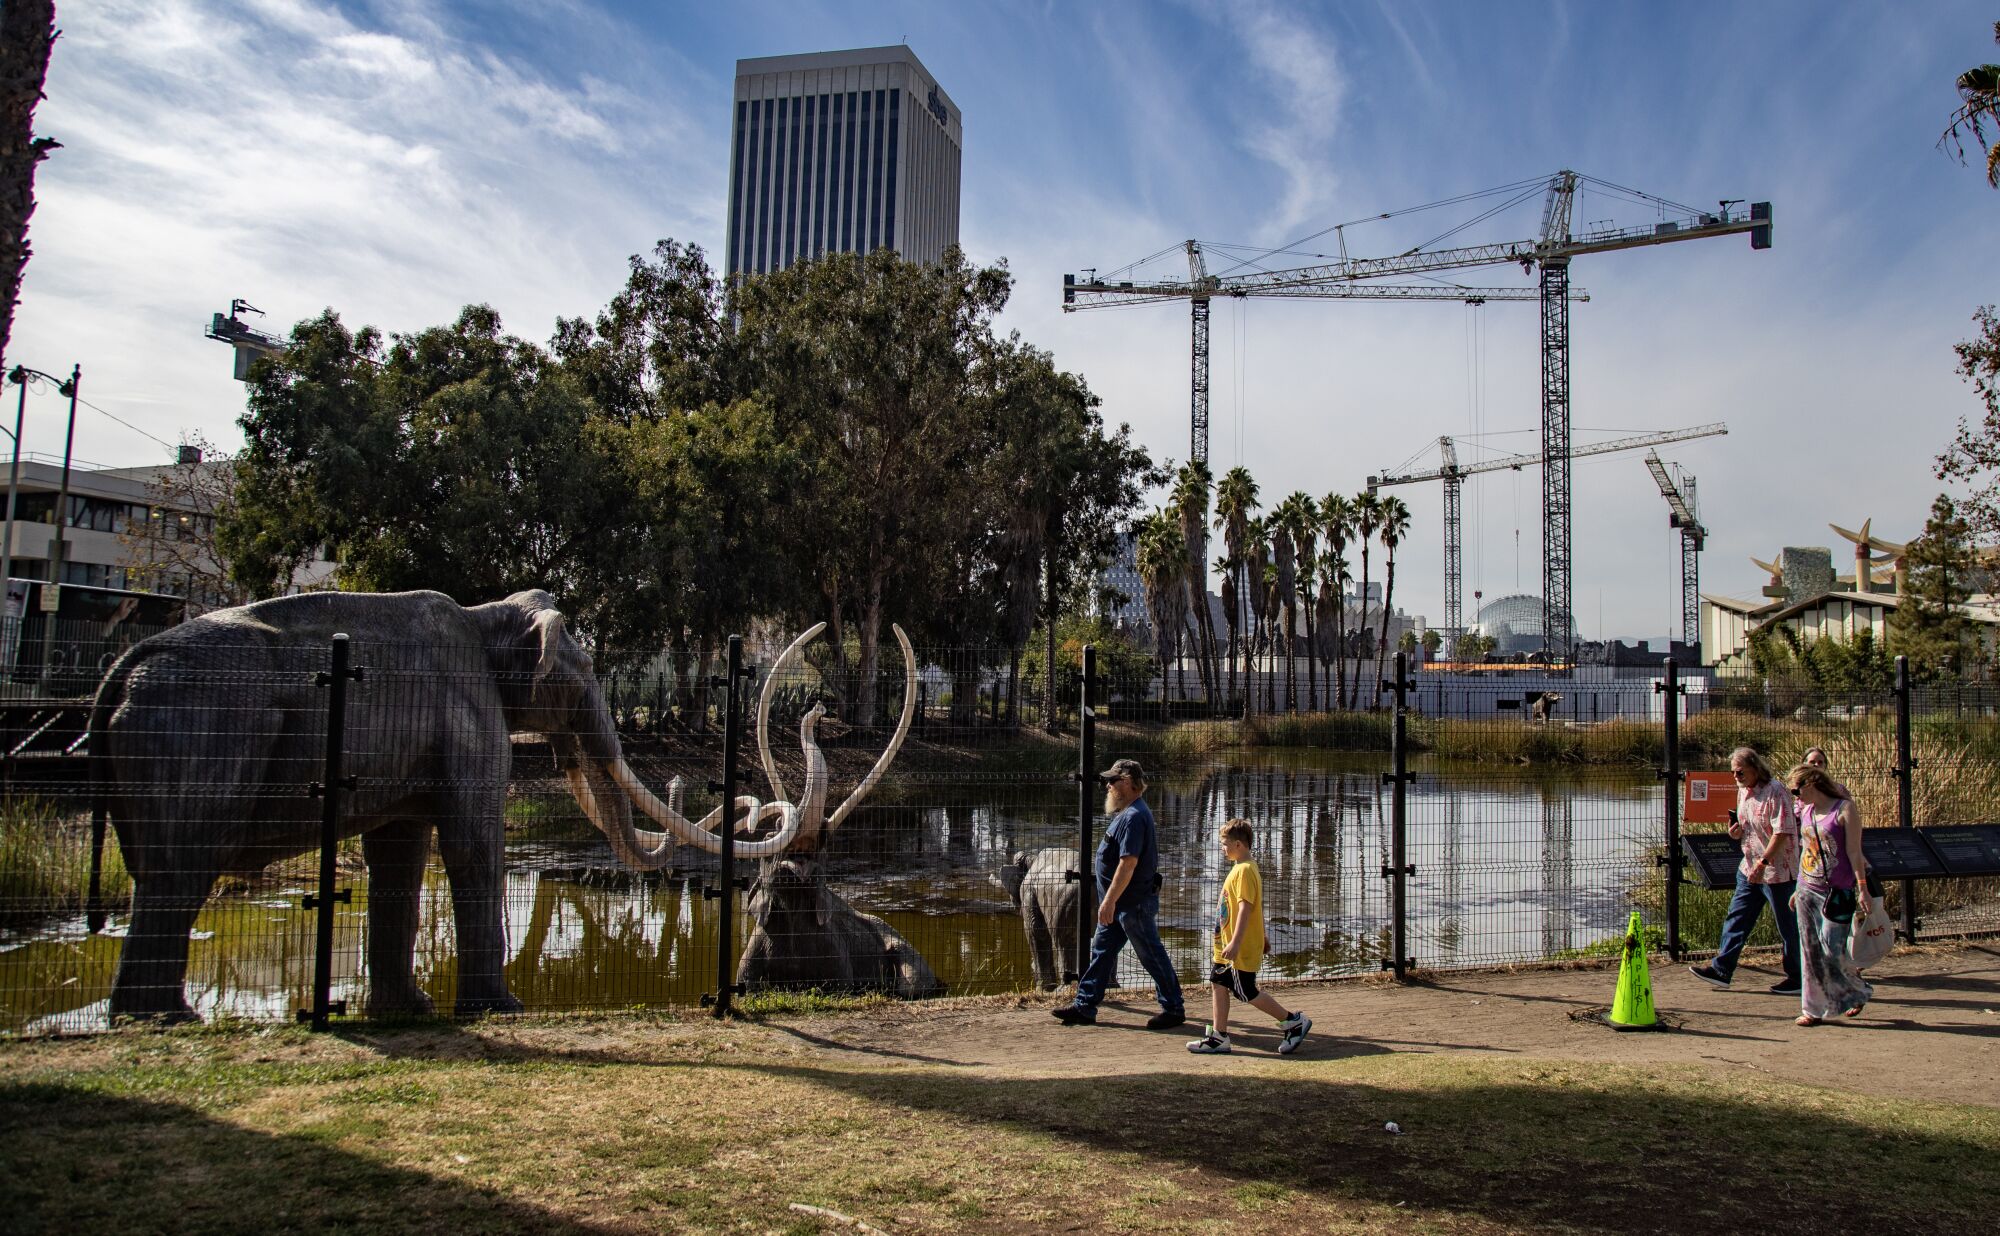 Visitors view the life-size Columbian Mammoths from the Ice Age on the edge of the large tar pits